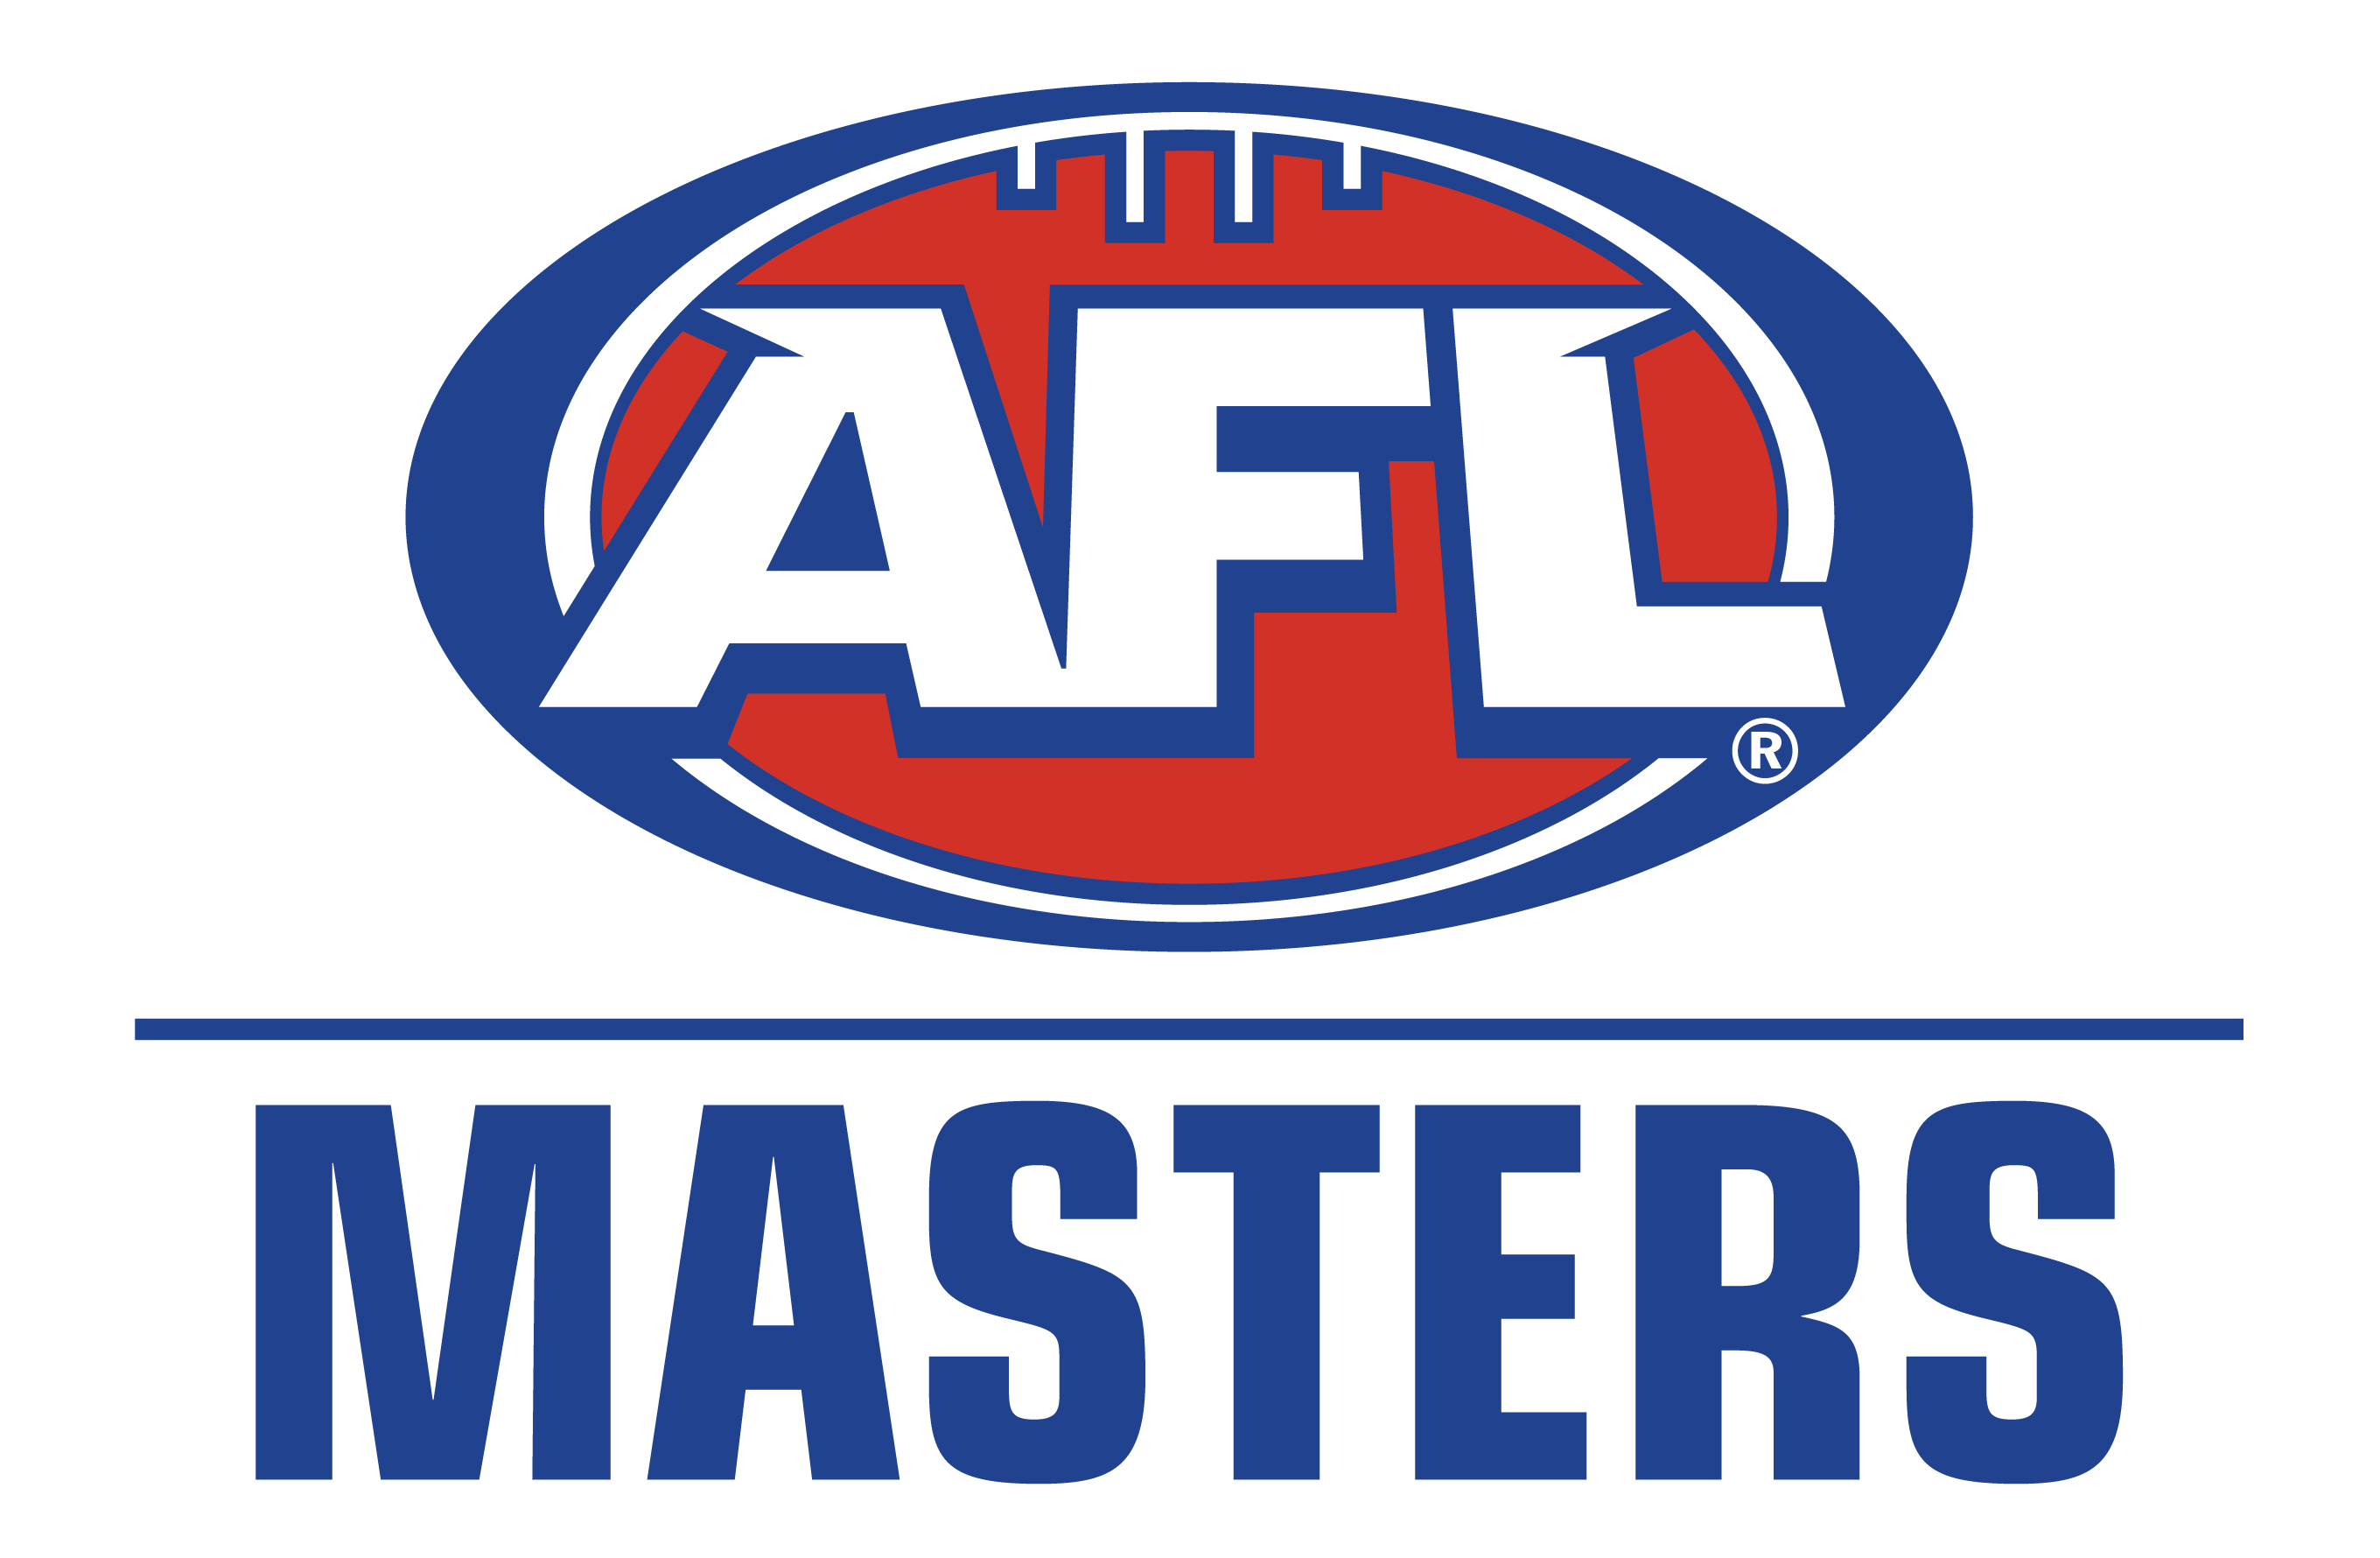 AFL Masters – fun safe inclusive footy for men & women over 35